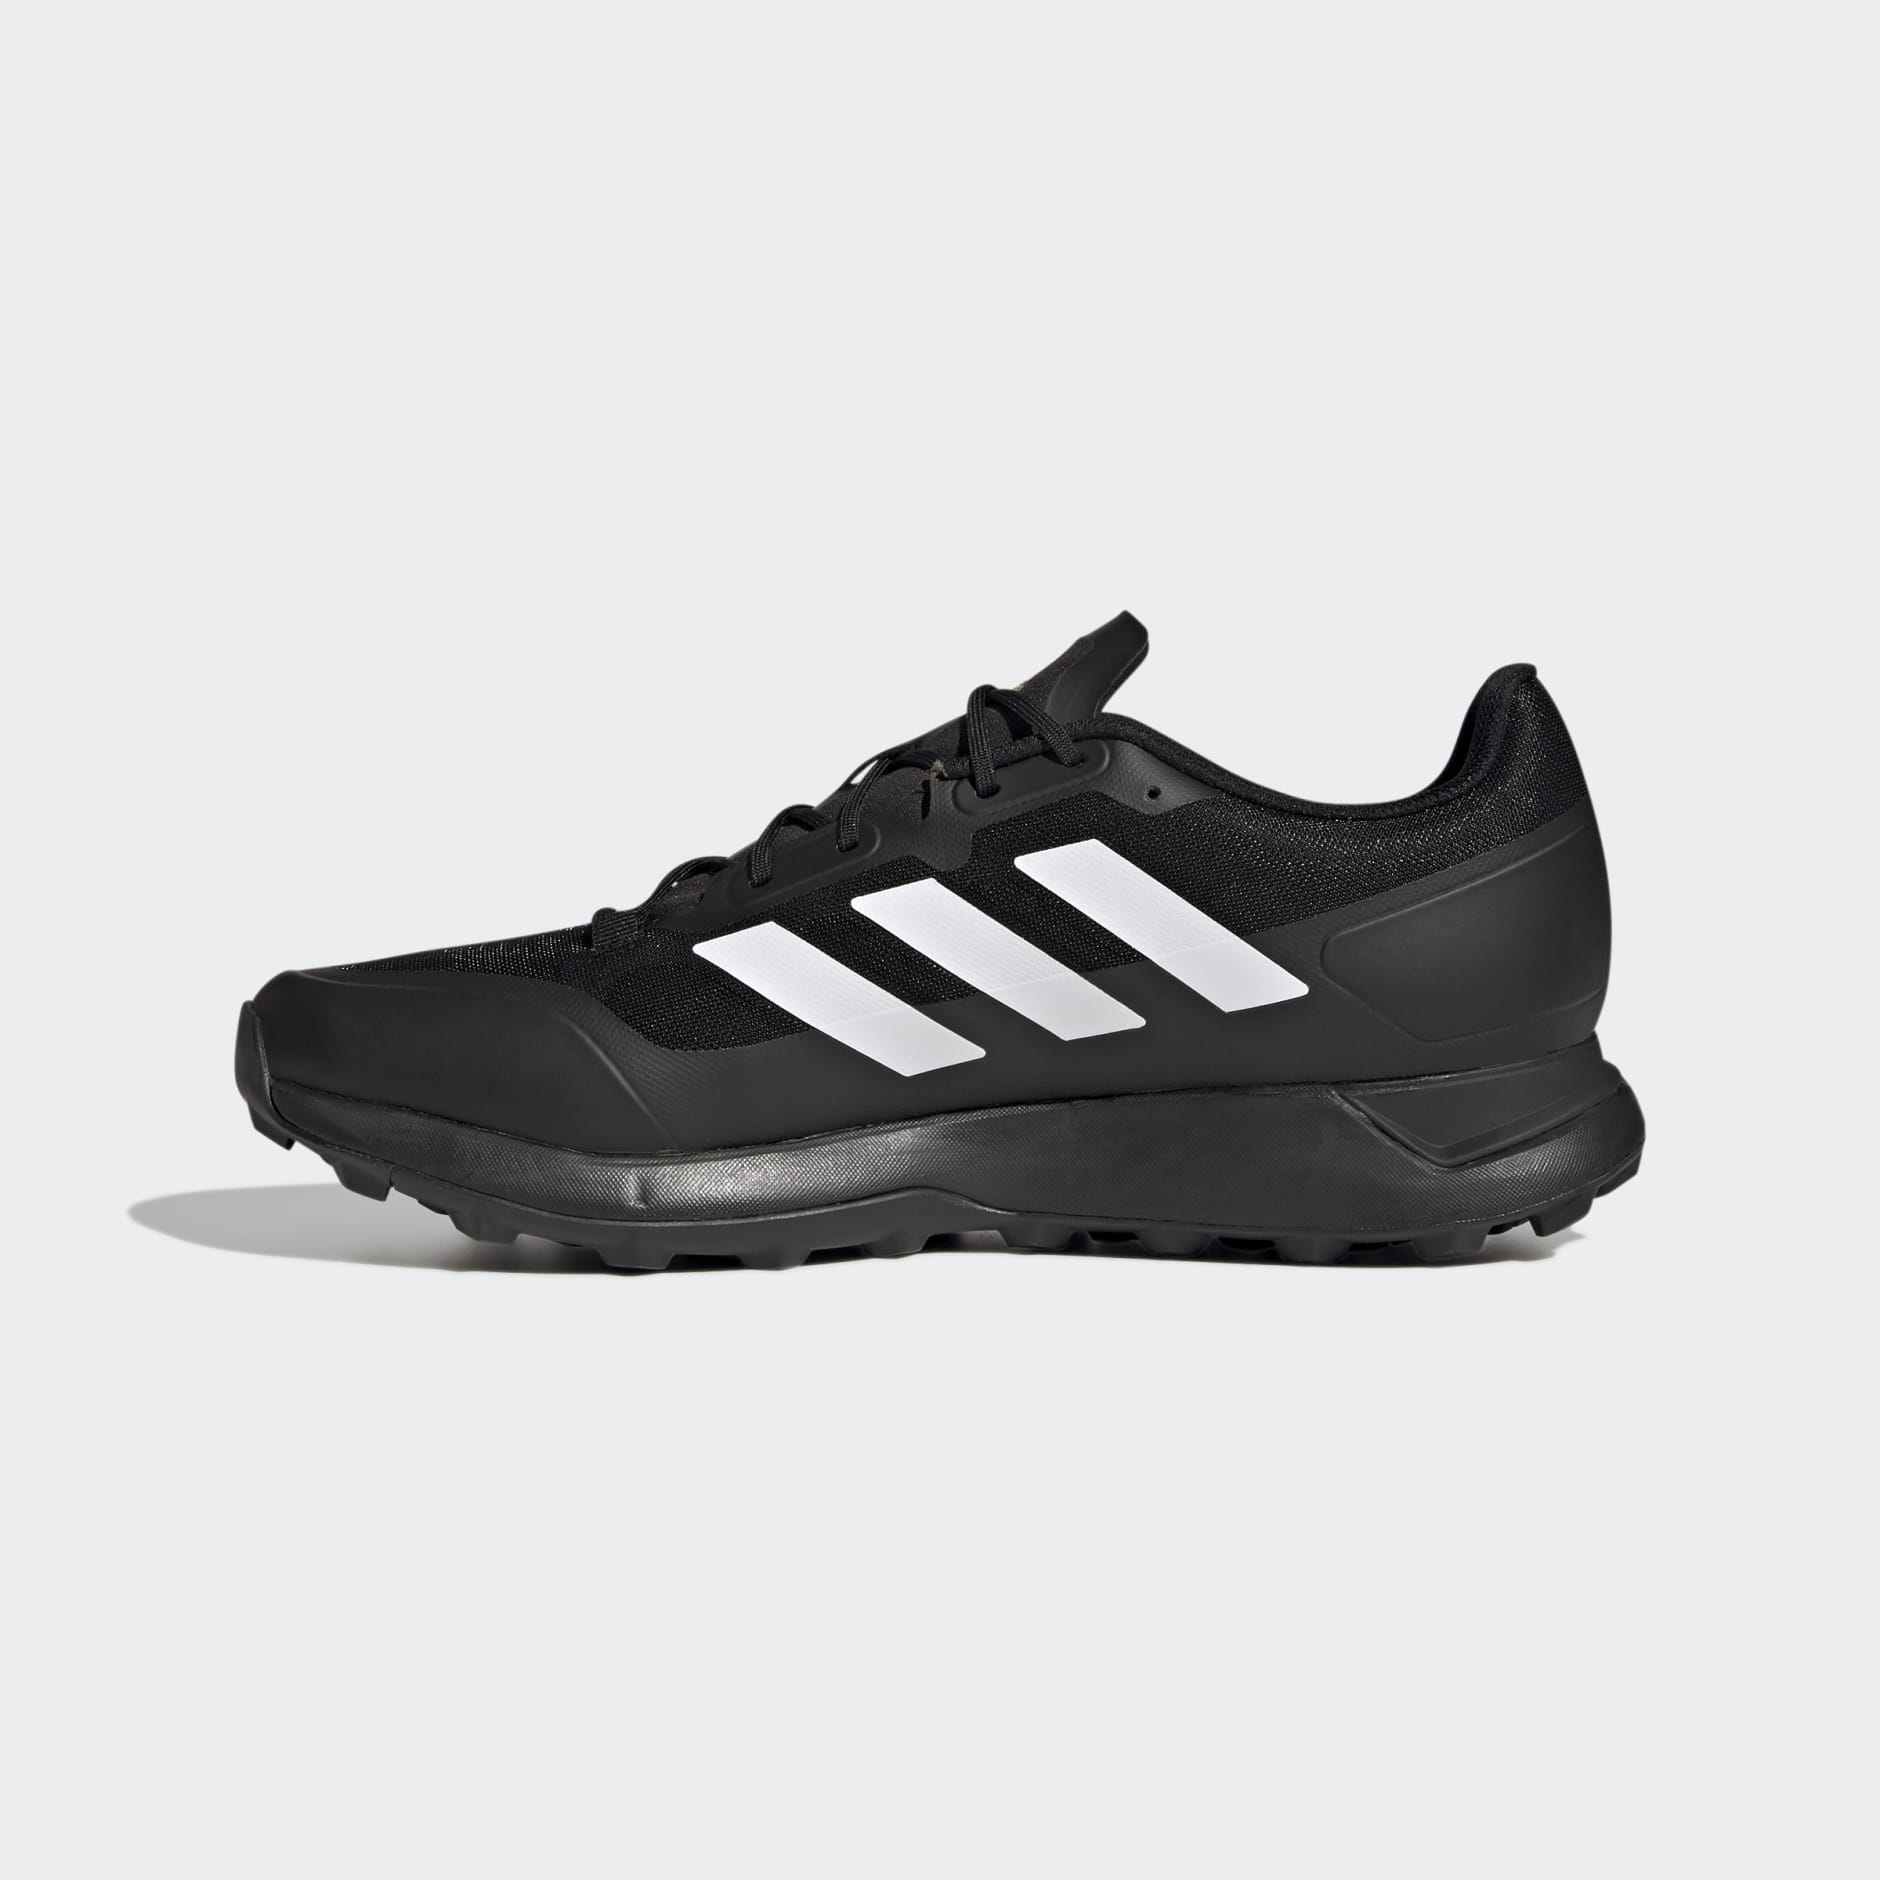 All products - Zone Dox 2.2 S Boots - Black | adidas South Africa